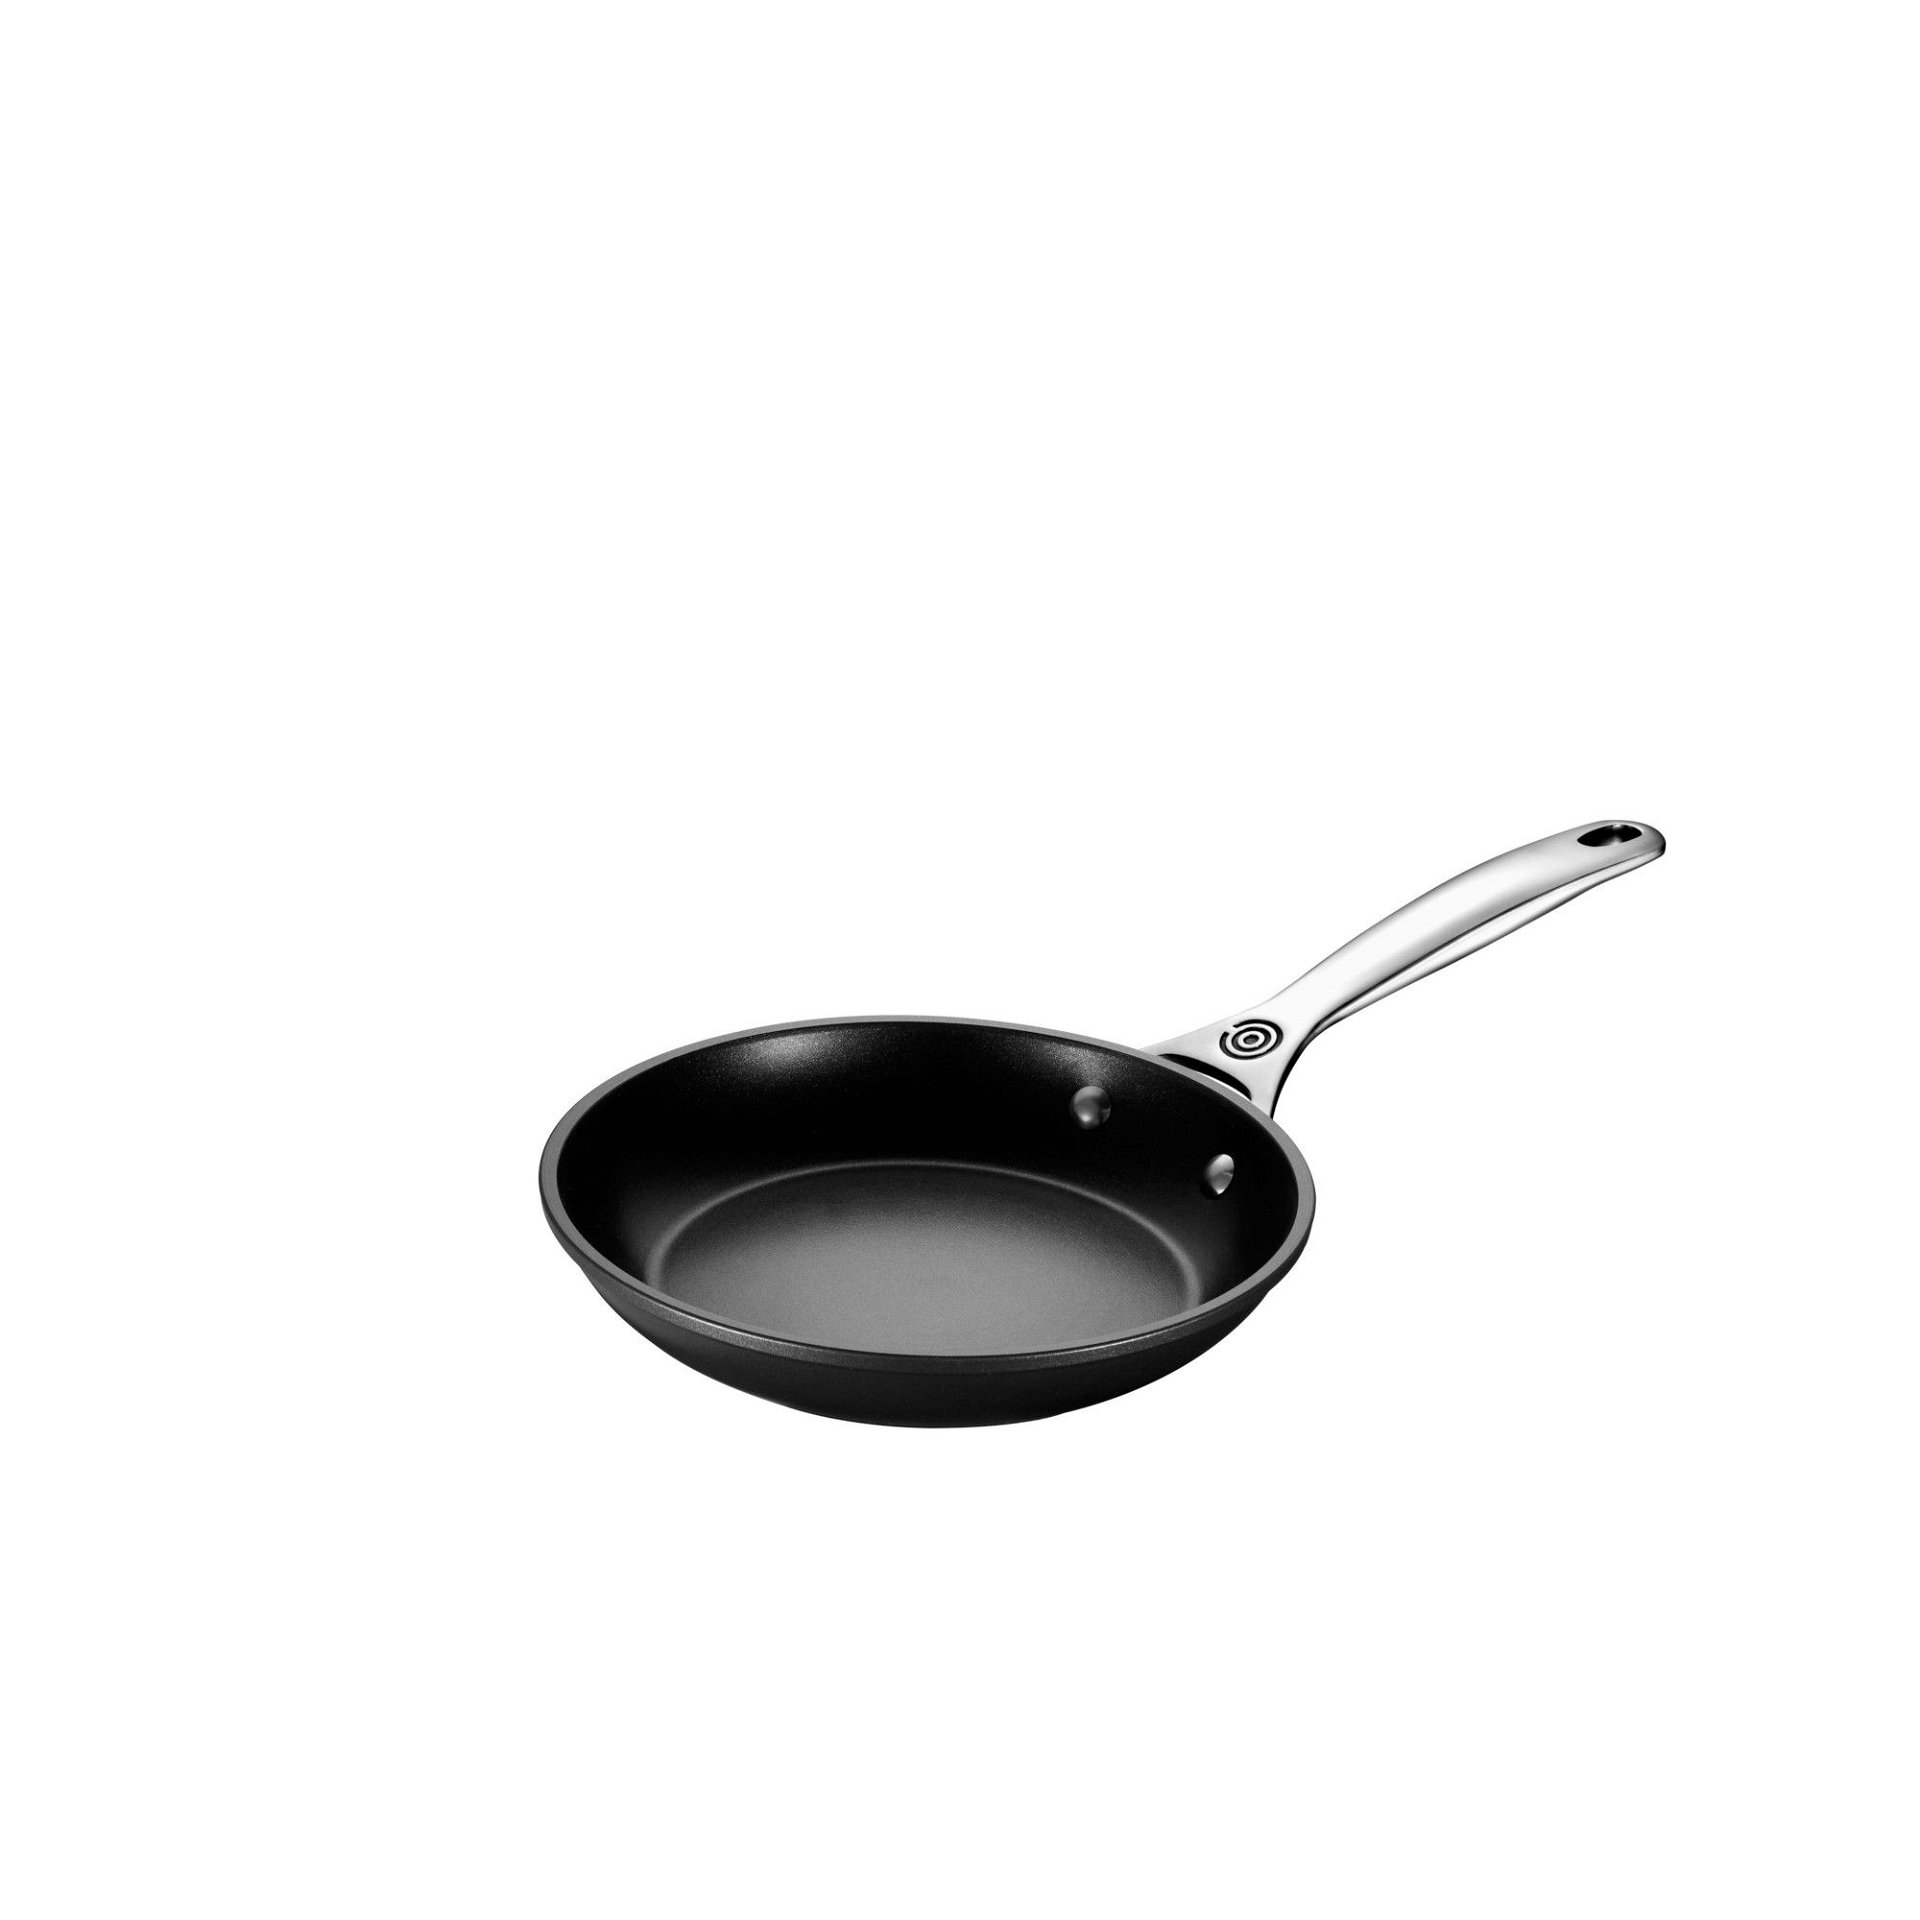 Cuisinart Chef's Classic Non-Stick Hard Anodized Crepe Pan - 10 inch Pan, 1.0 ct, Black